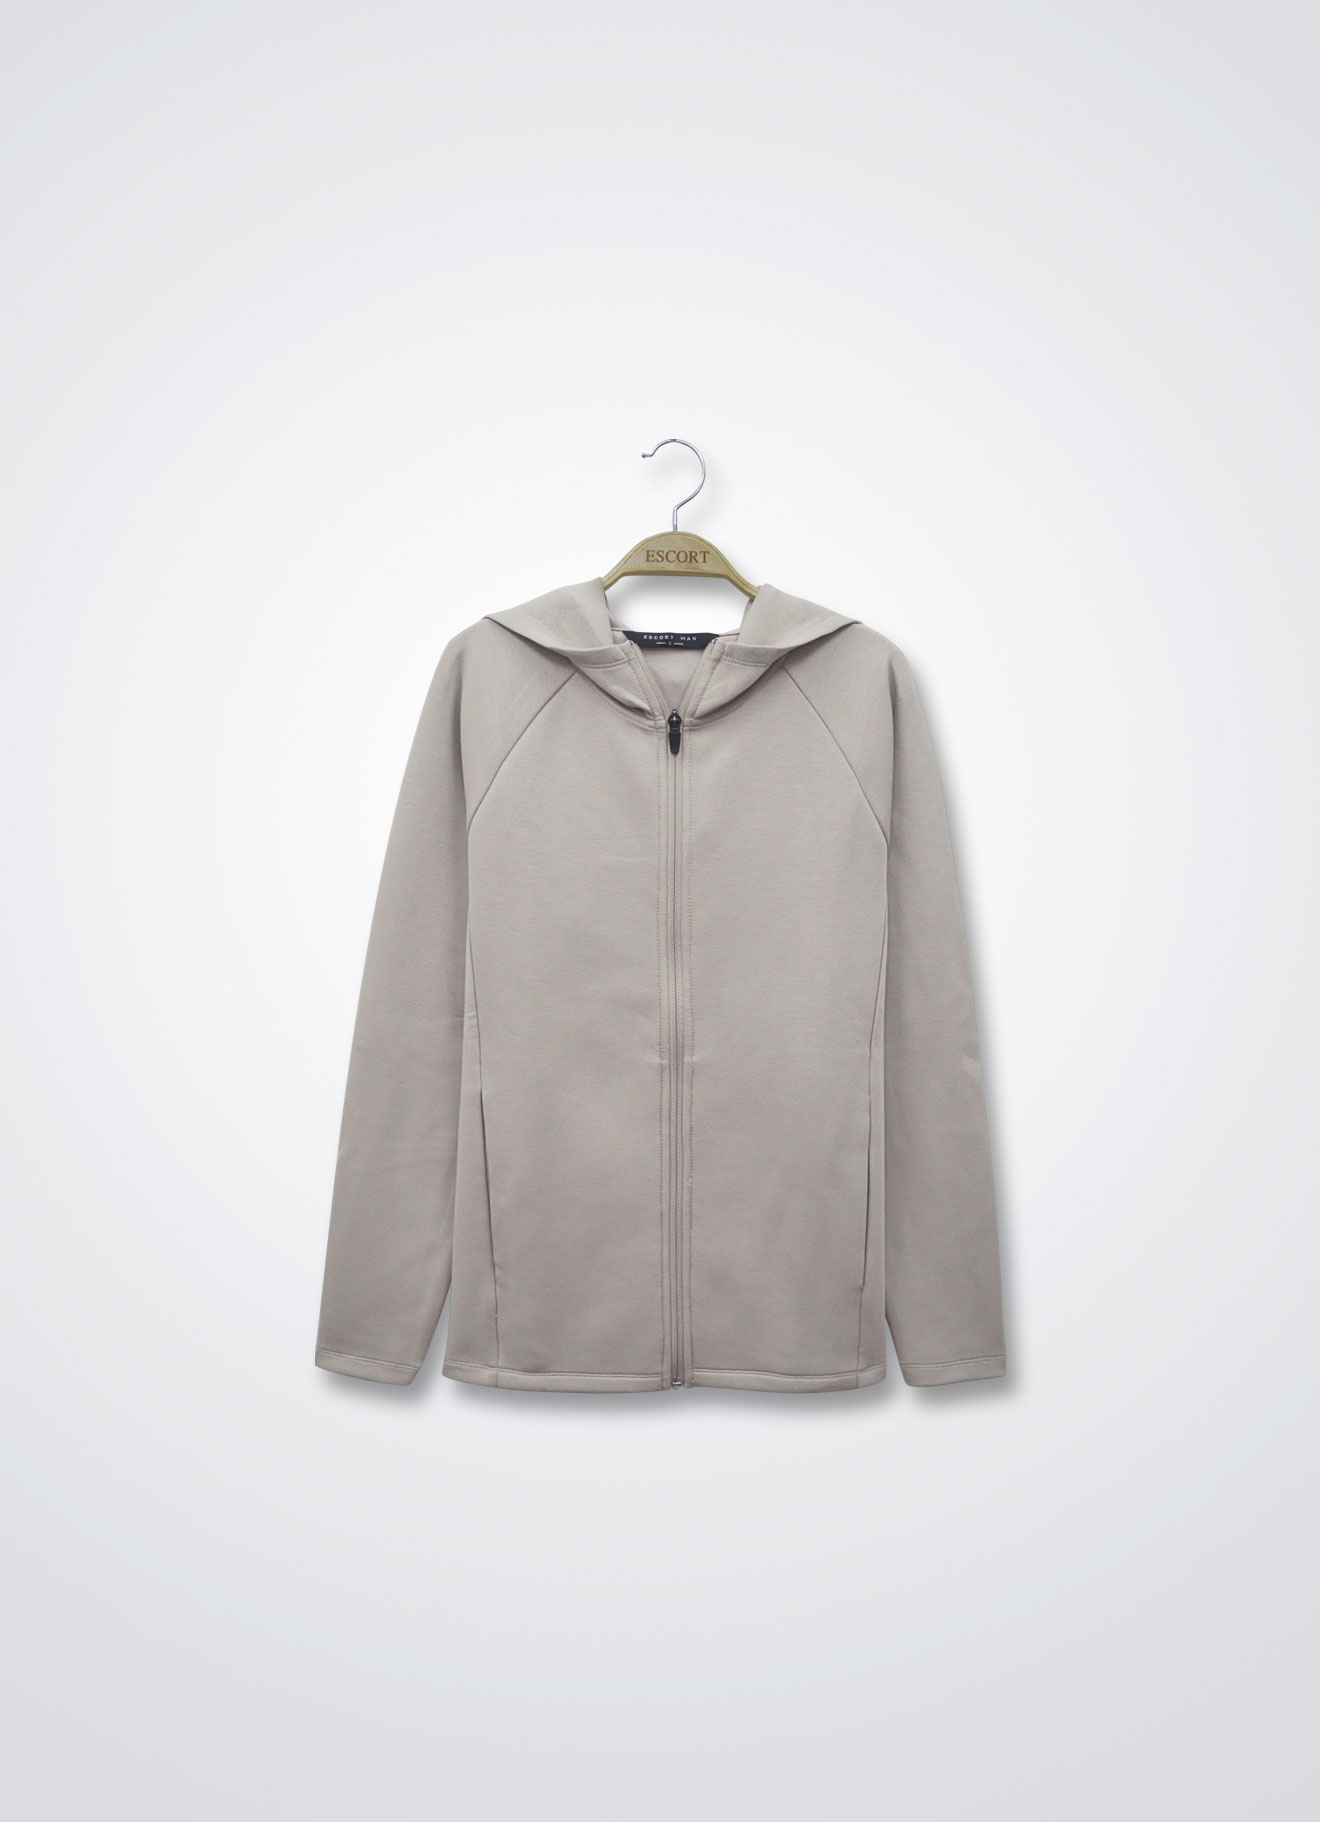 Fog by Hooded Jacket